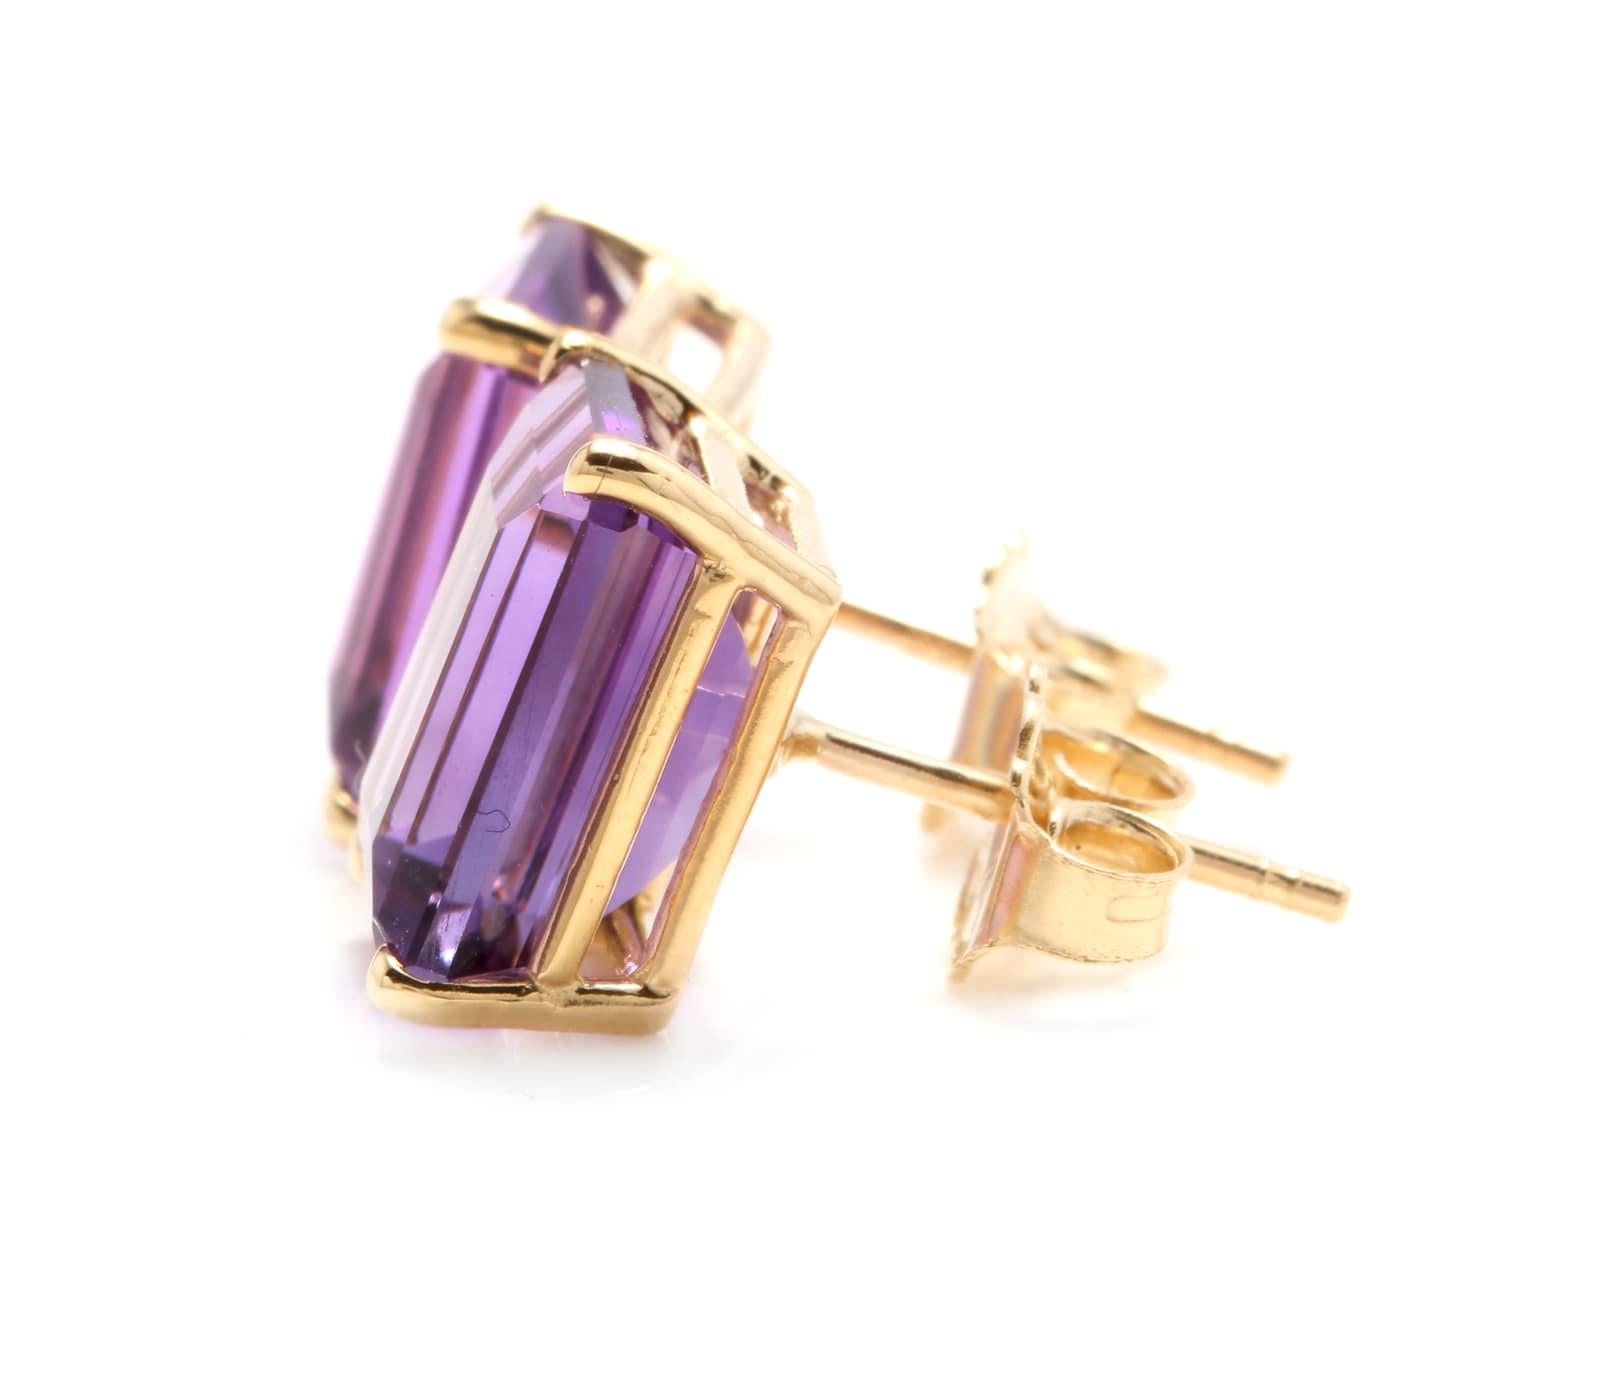 Exquisite Top Quality 7.45 Carats Natural Amethyst 14K Solid Yellow Gold Stud Earrings

Amazing looking piece!

Total Natural Emerald Cut Amethyst Weight is: 7.45 Carats (both earrings)

Amethyst Measures: Approx. 10.00 x 8.00mm

Total Earrings